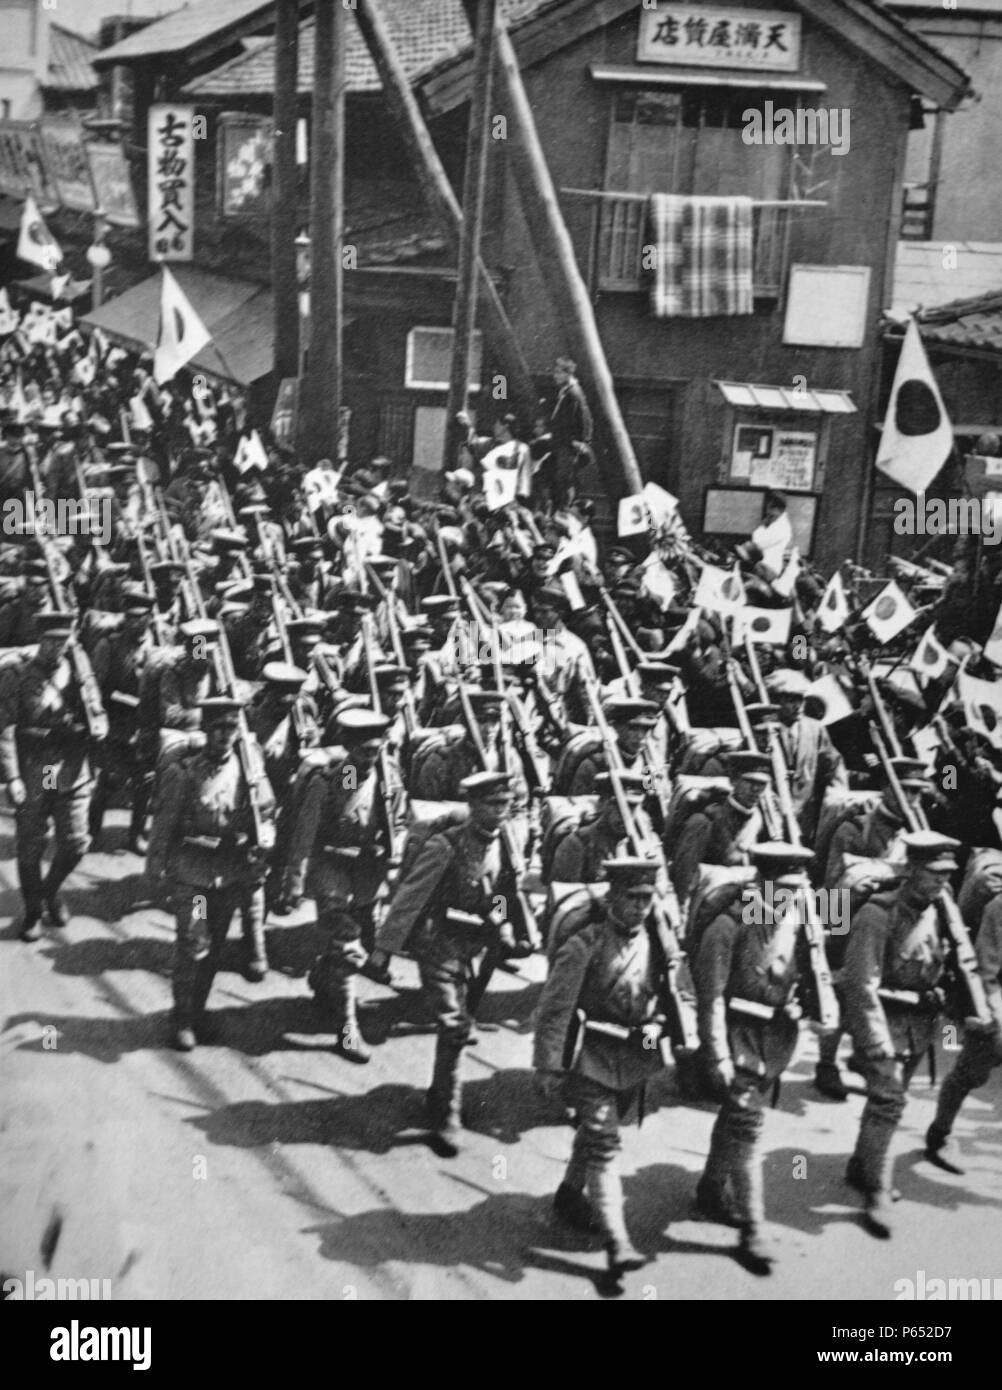 Celebratory parade by Japanese soldiers before embarkation to Manchuria the Japanese controlled area of China during the Sino-Japanese war. Stock Photo